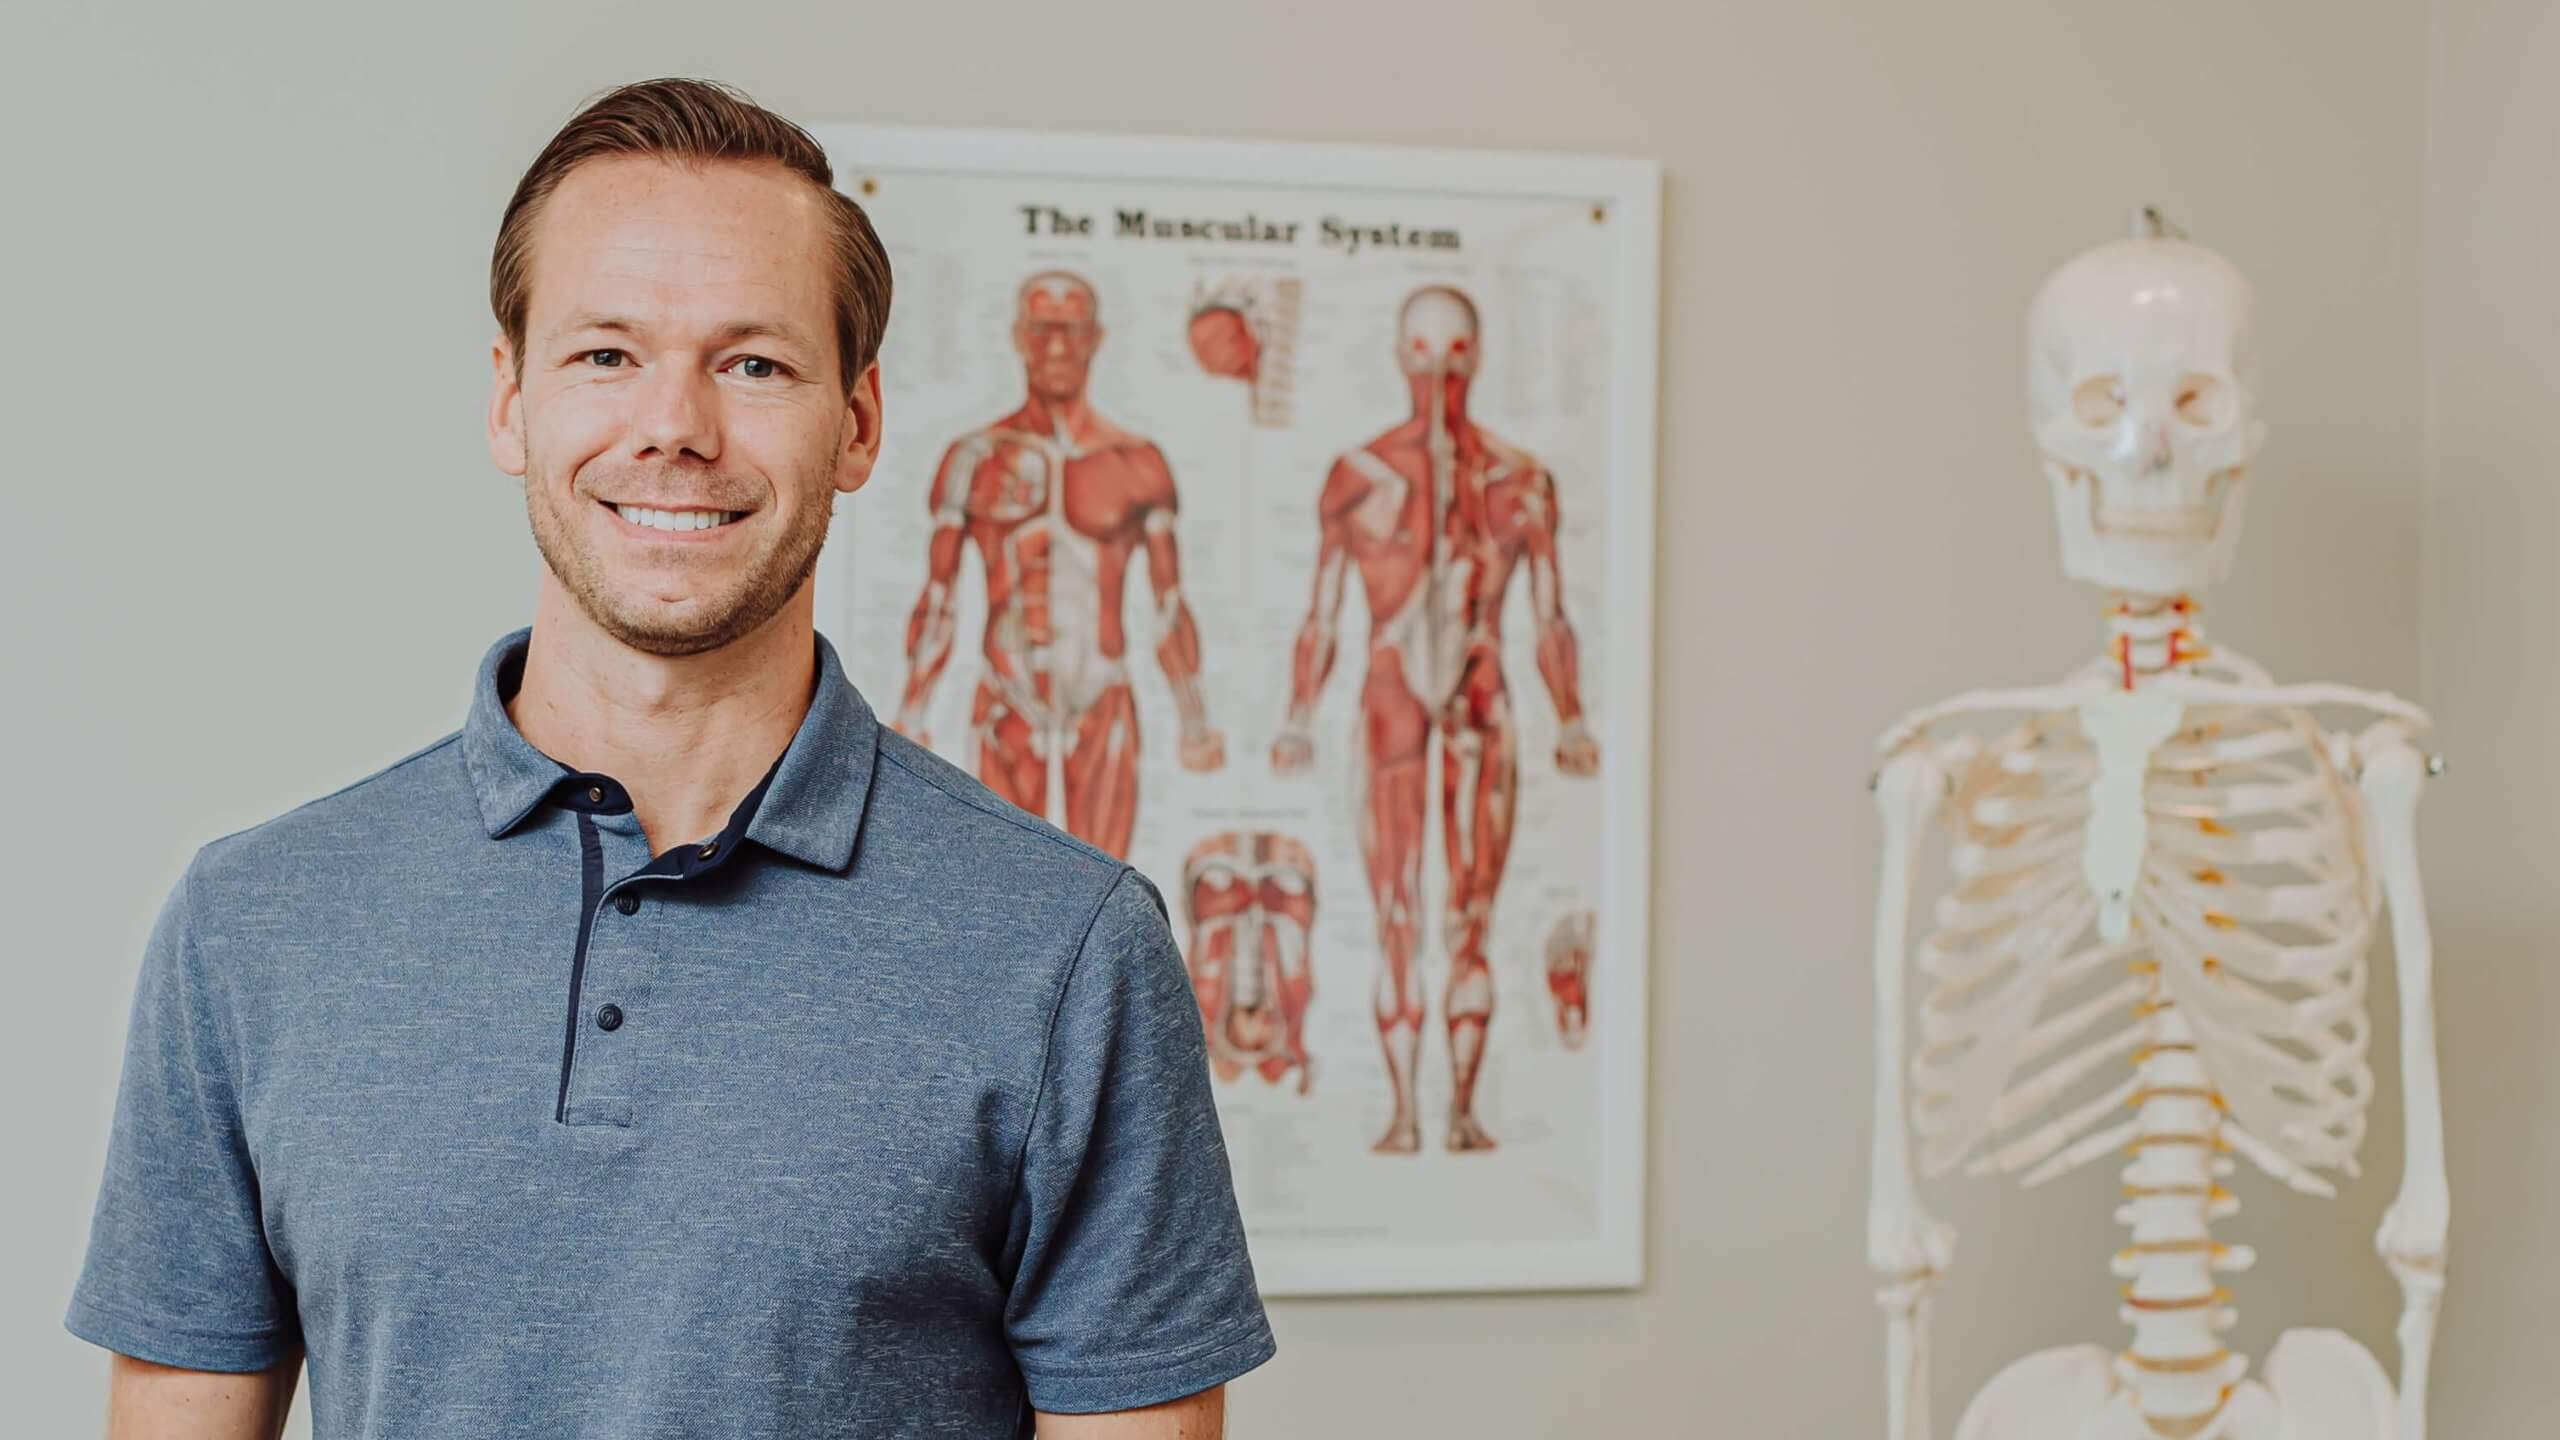 Dr. Ryon about Chiropractor care | Wellness Co in Zeeland, MI